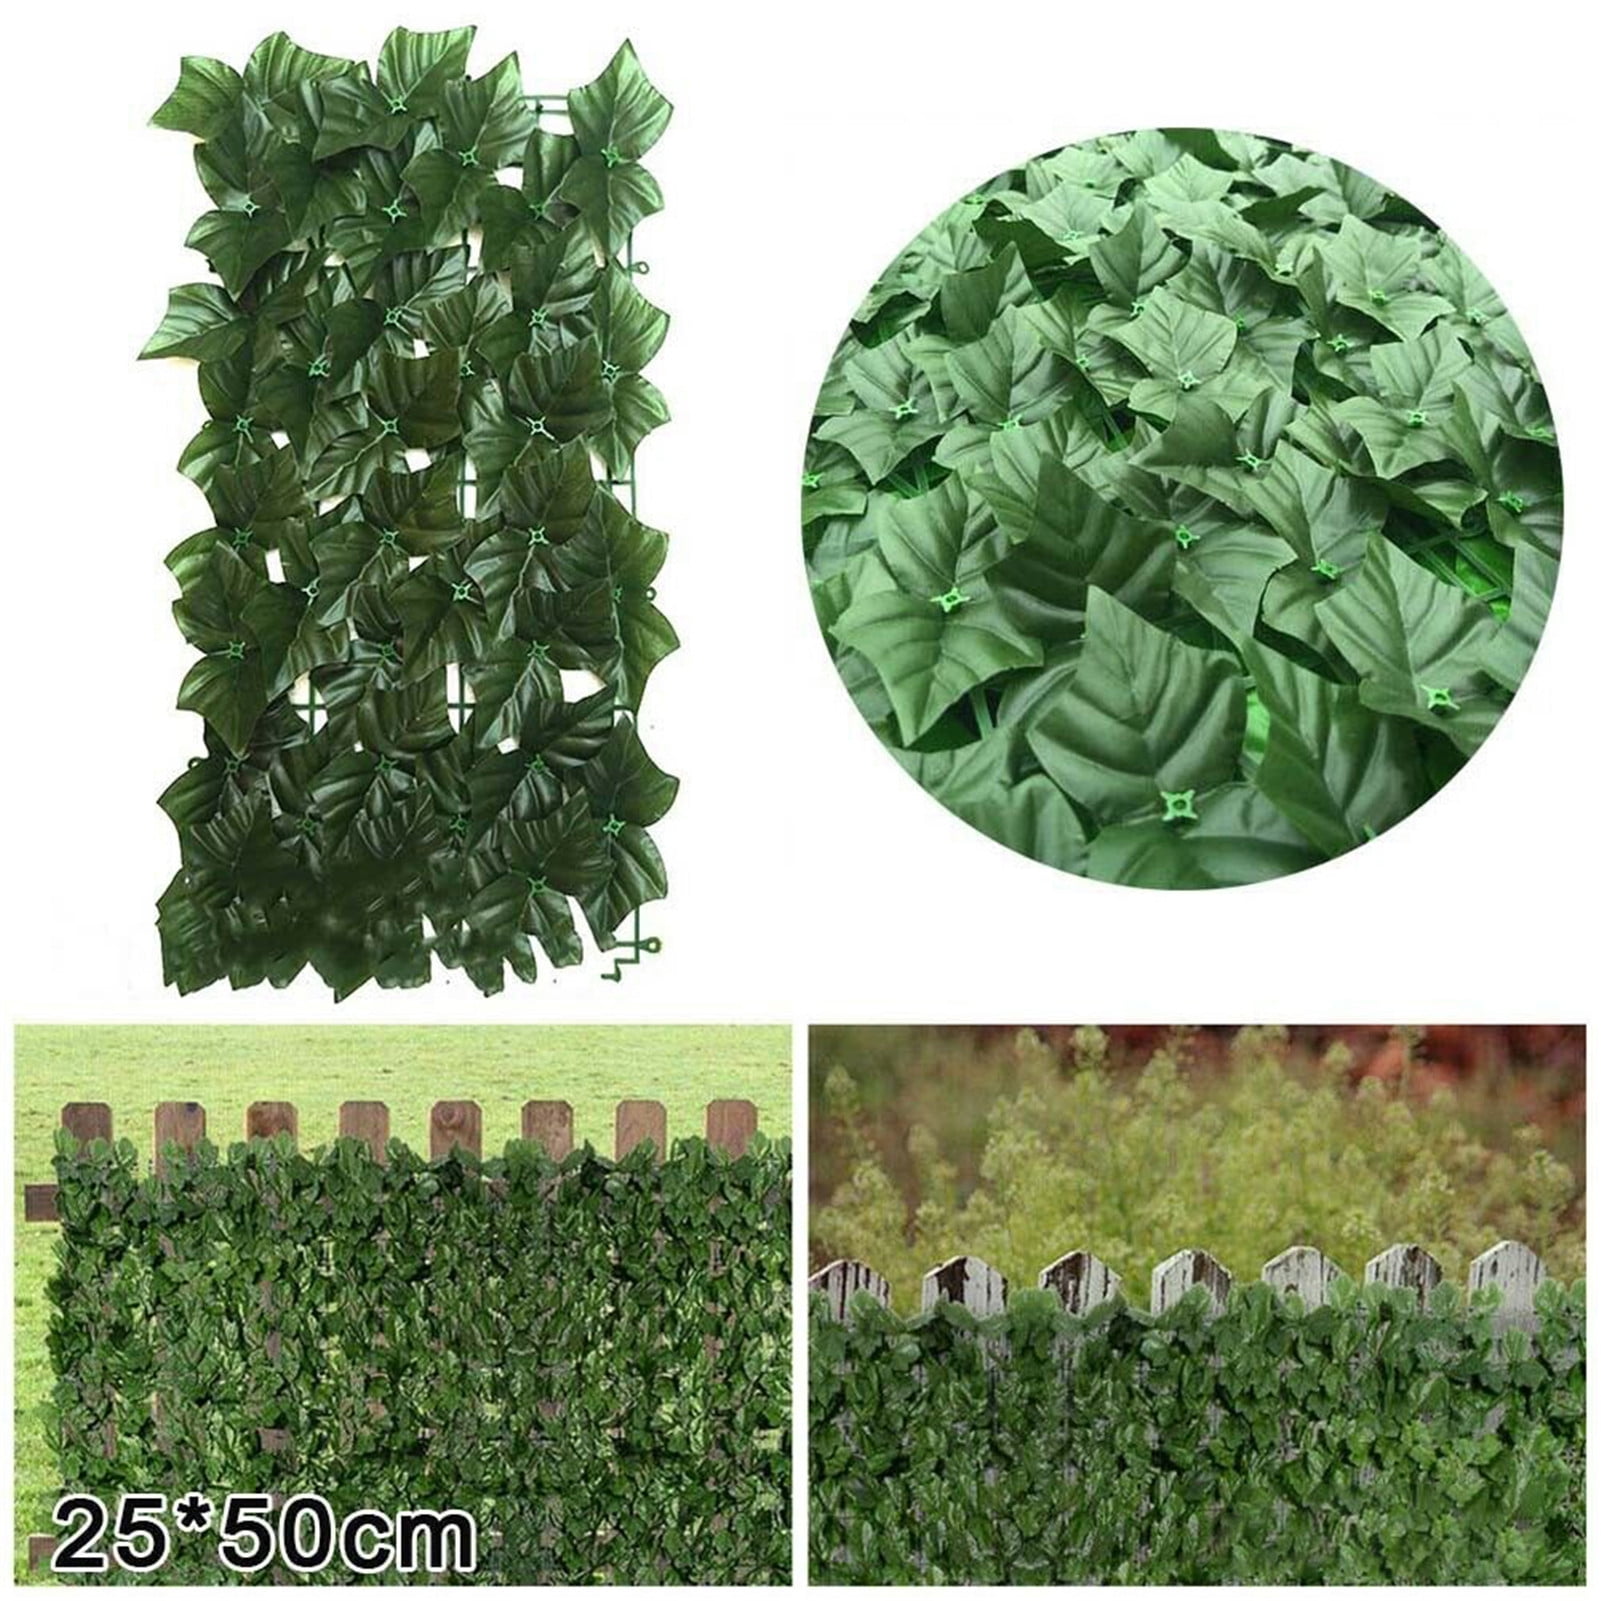 Artificial Hedge Ivy Leaf Garden Fence Roll Privacy Screen Balcony Wall Cover UK 